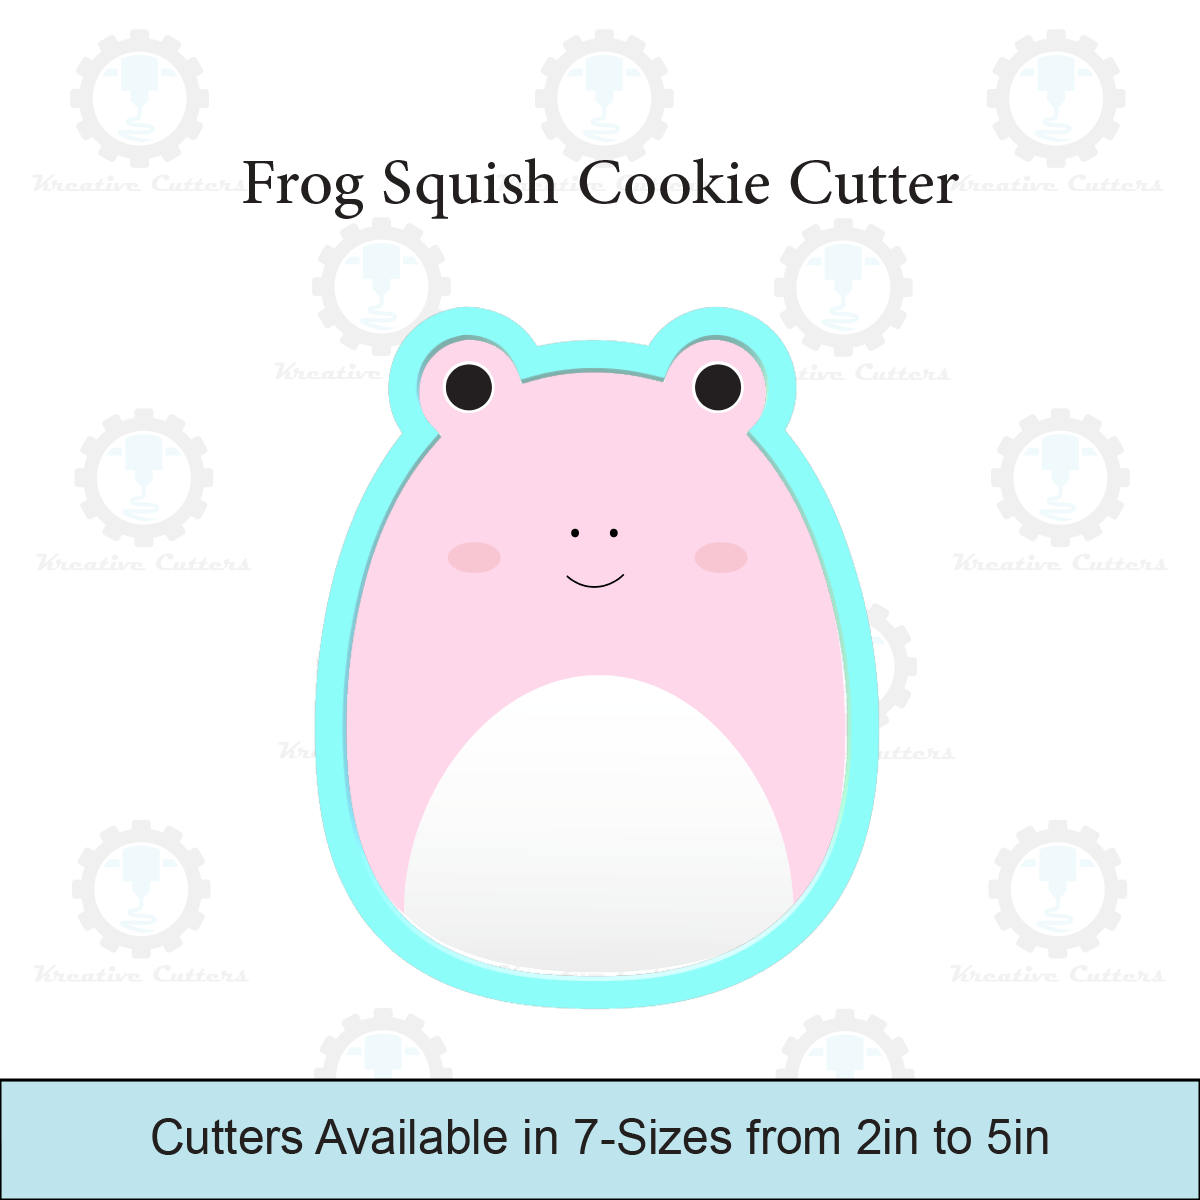 Frog Squish Cookie Cutters